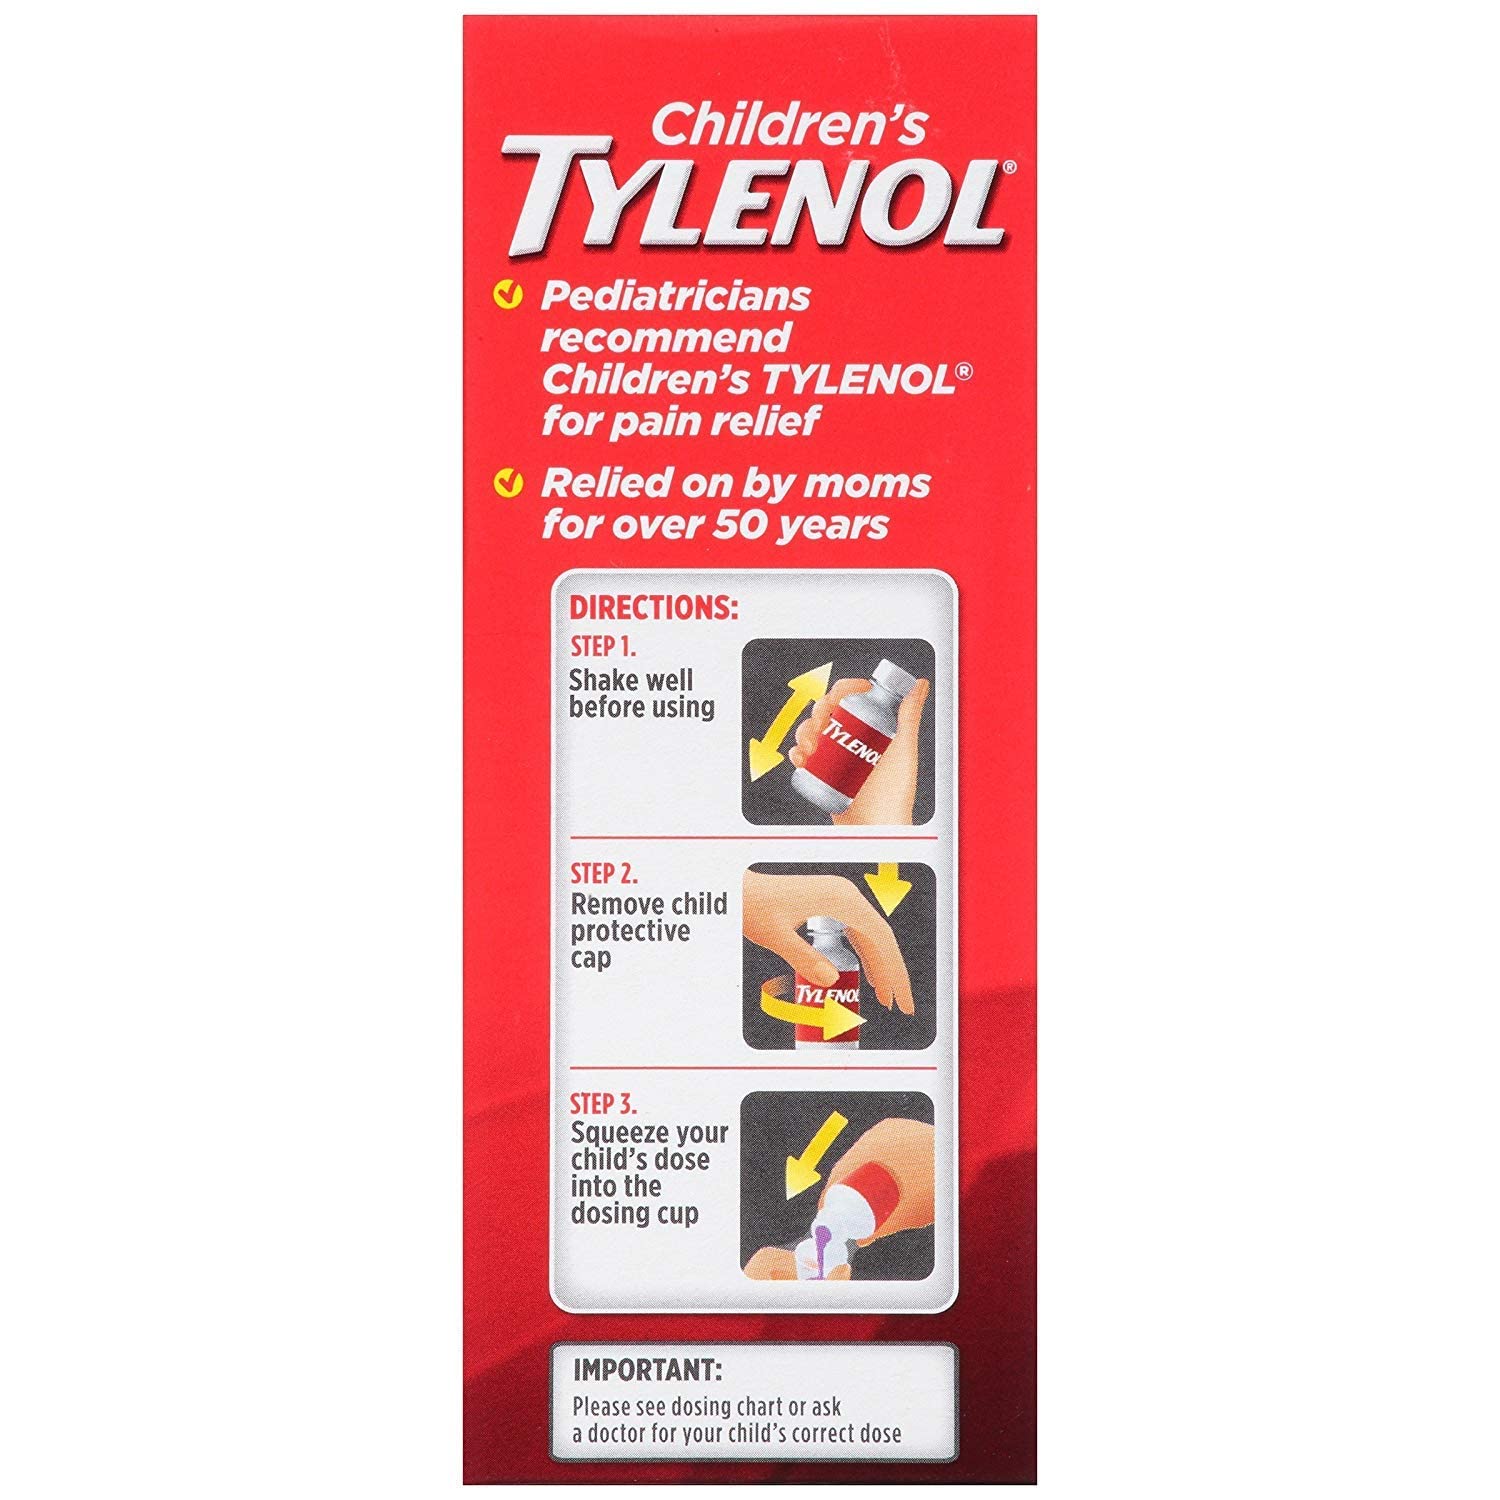 Tylenol Childrens Pain Reliever And Fever Reducer, Cherry Blast Flavor - 4 Oz, 3 Pack, Liquid - image 3 of 7